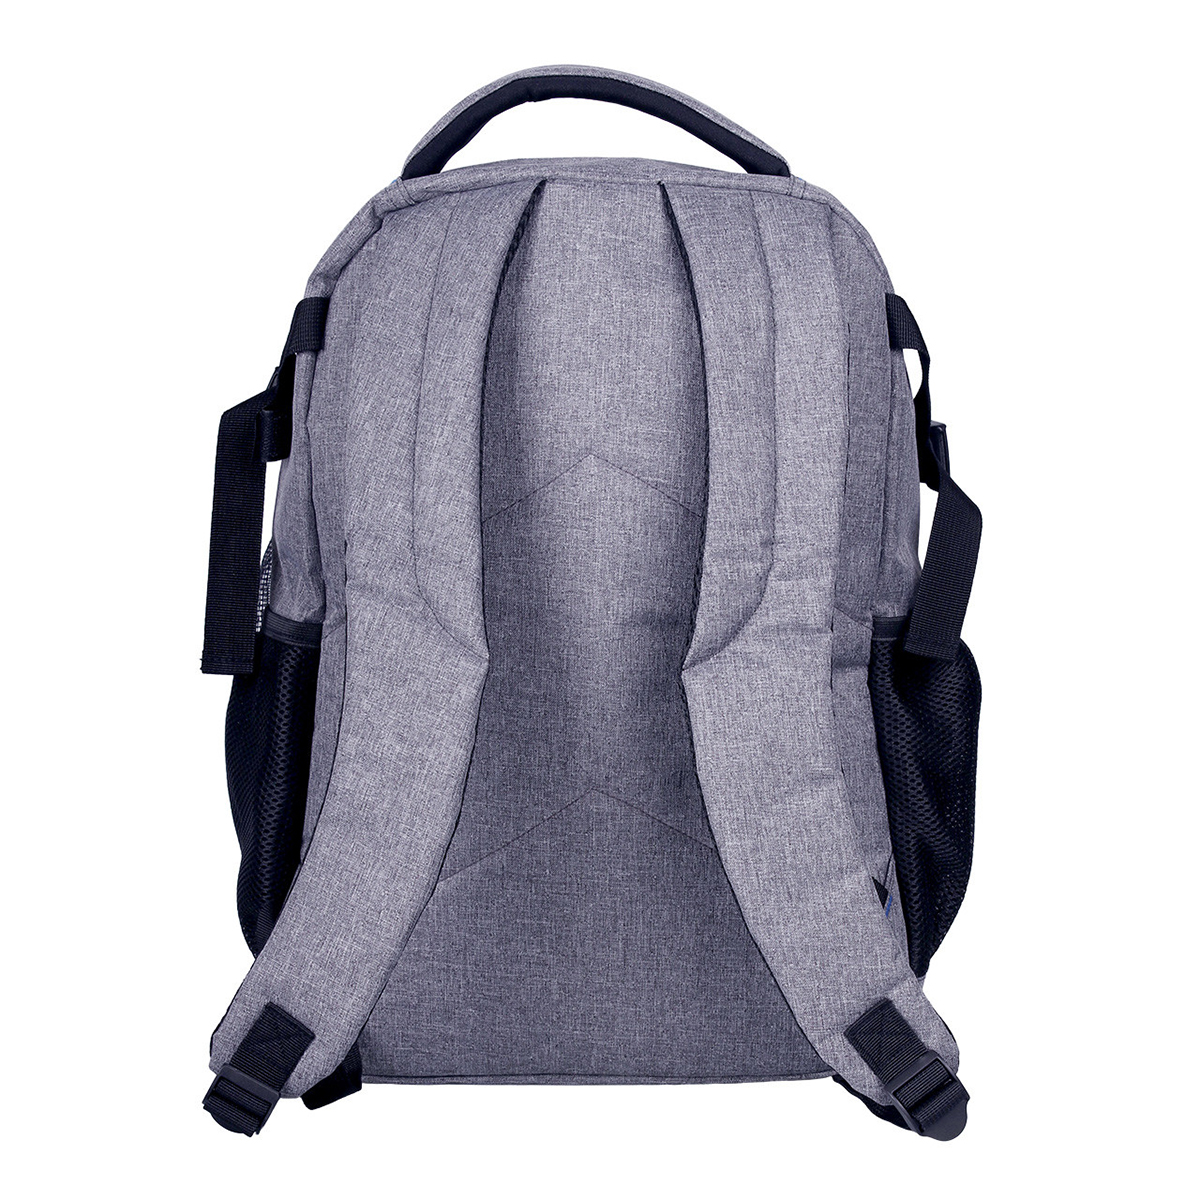 backpack-qhp_1500x1500_54780